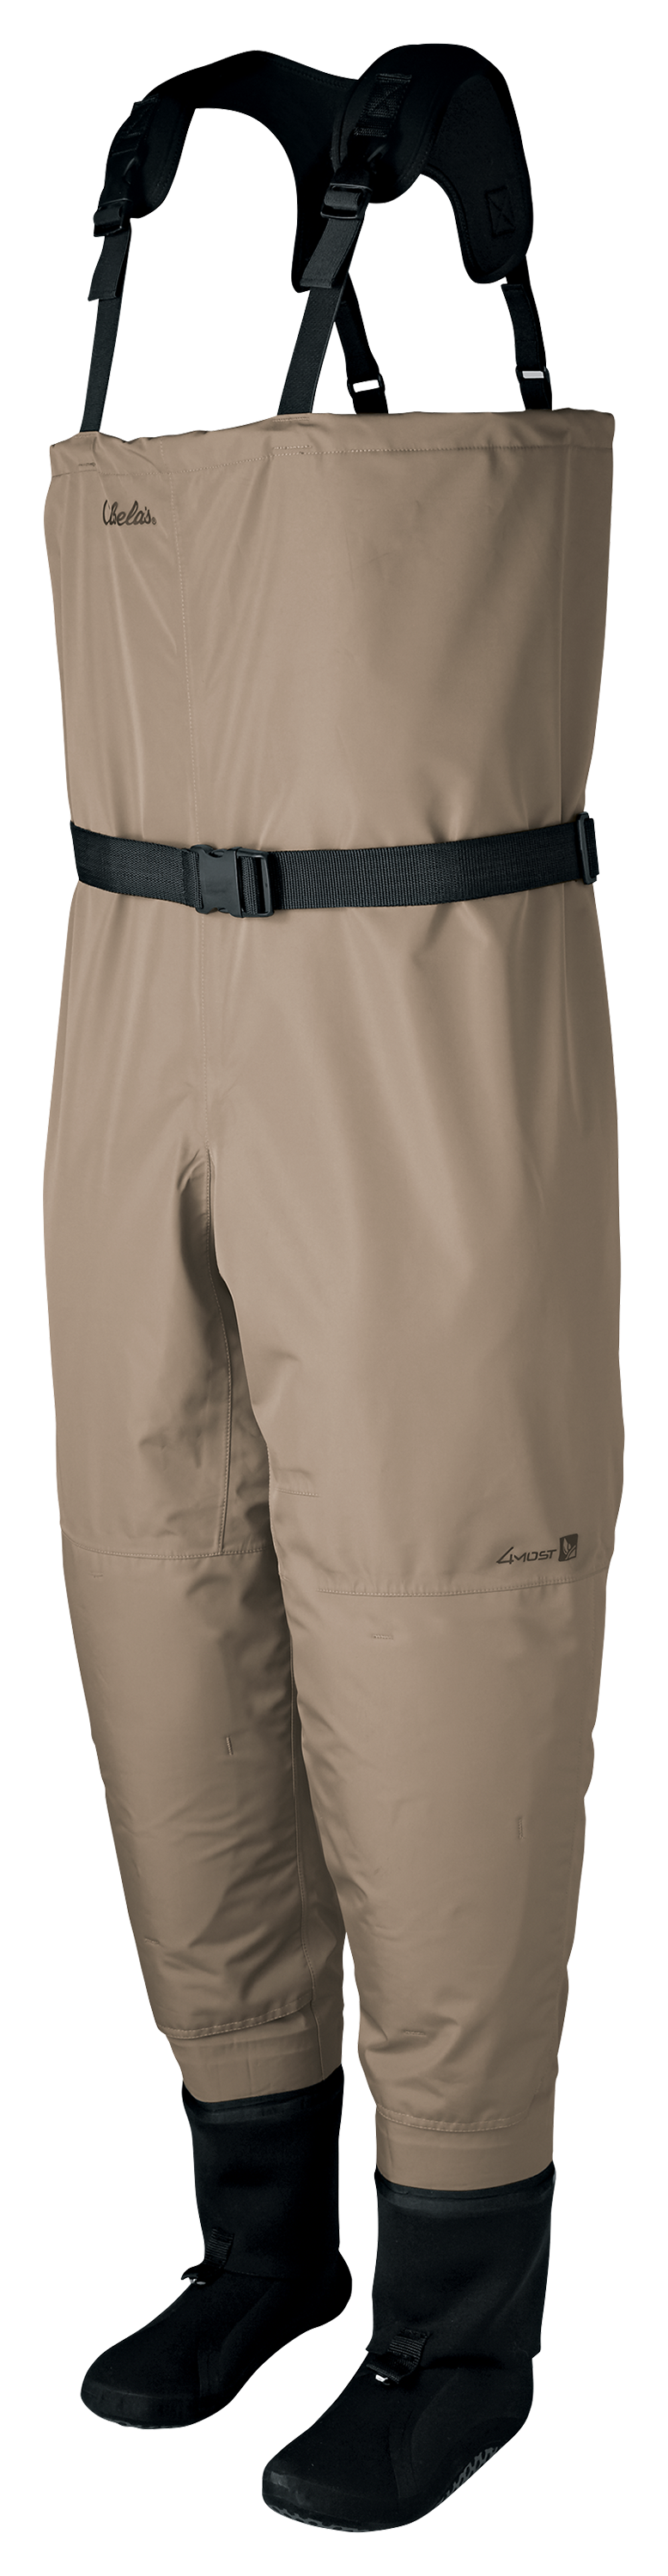 Cabela's Premium Breathable Stocking-Foot Fishing Waders for Men - Tan - Extra Large Tall